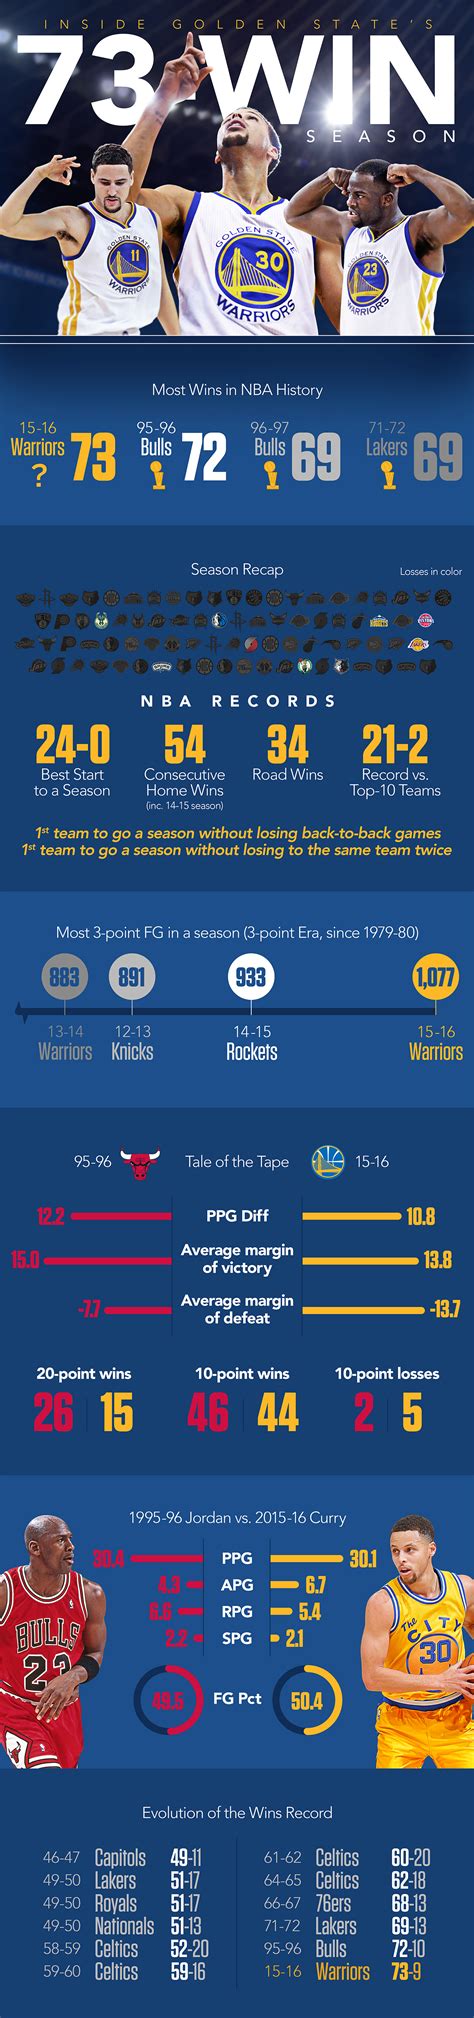 golden state warriors game today stats